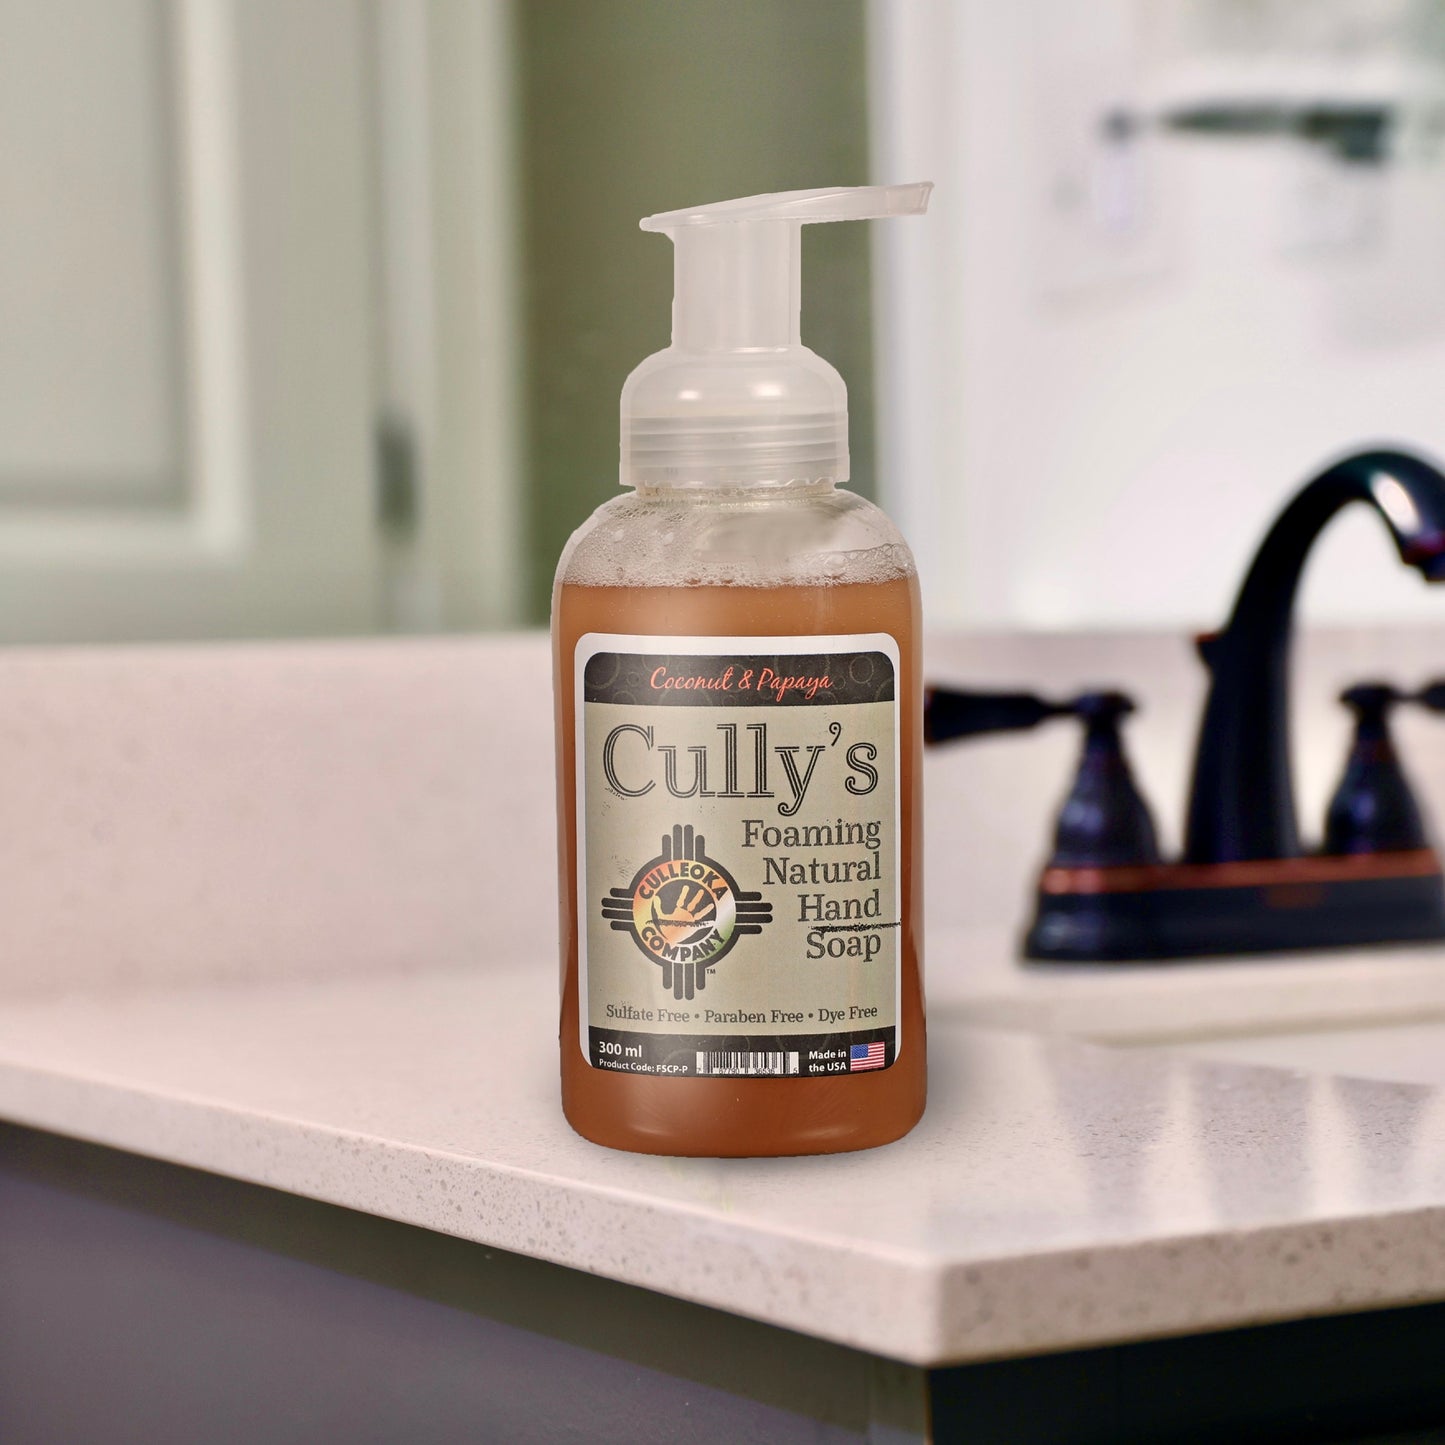 Cully's Foaming Natural Hand Soap 2 boxes (24 units) - Business